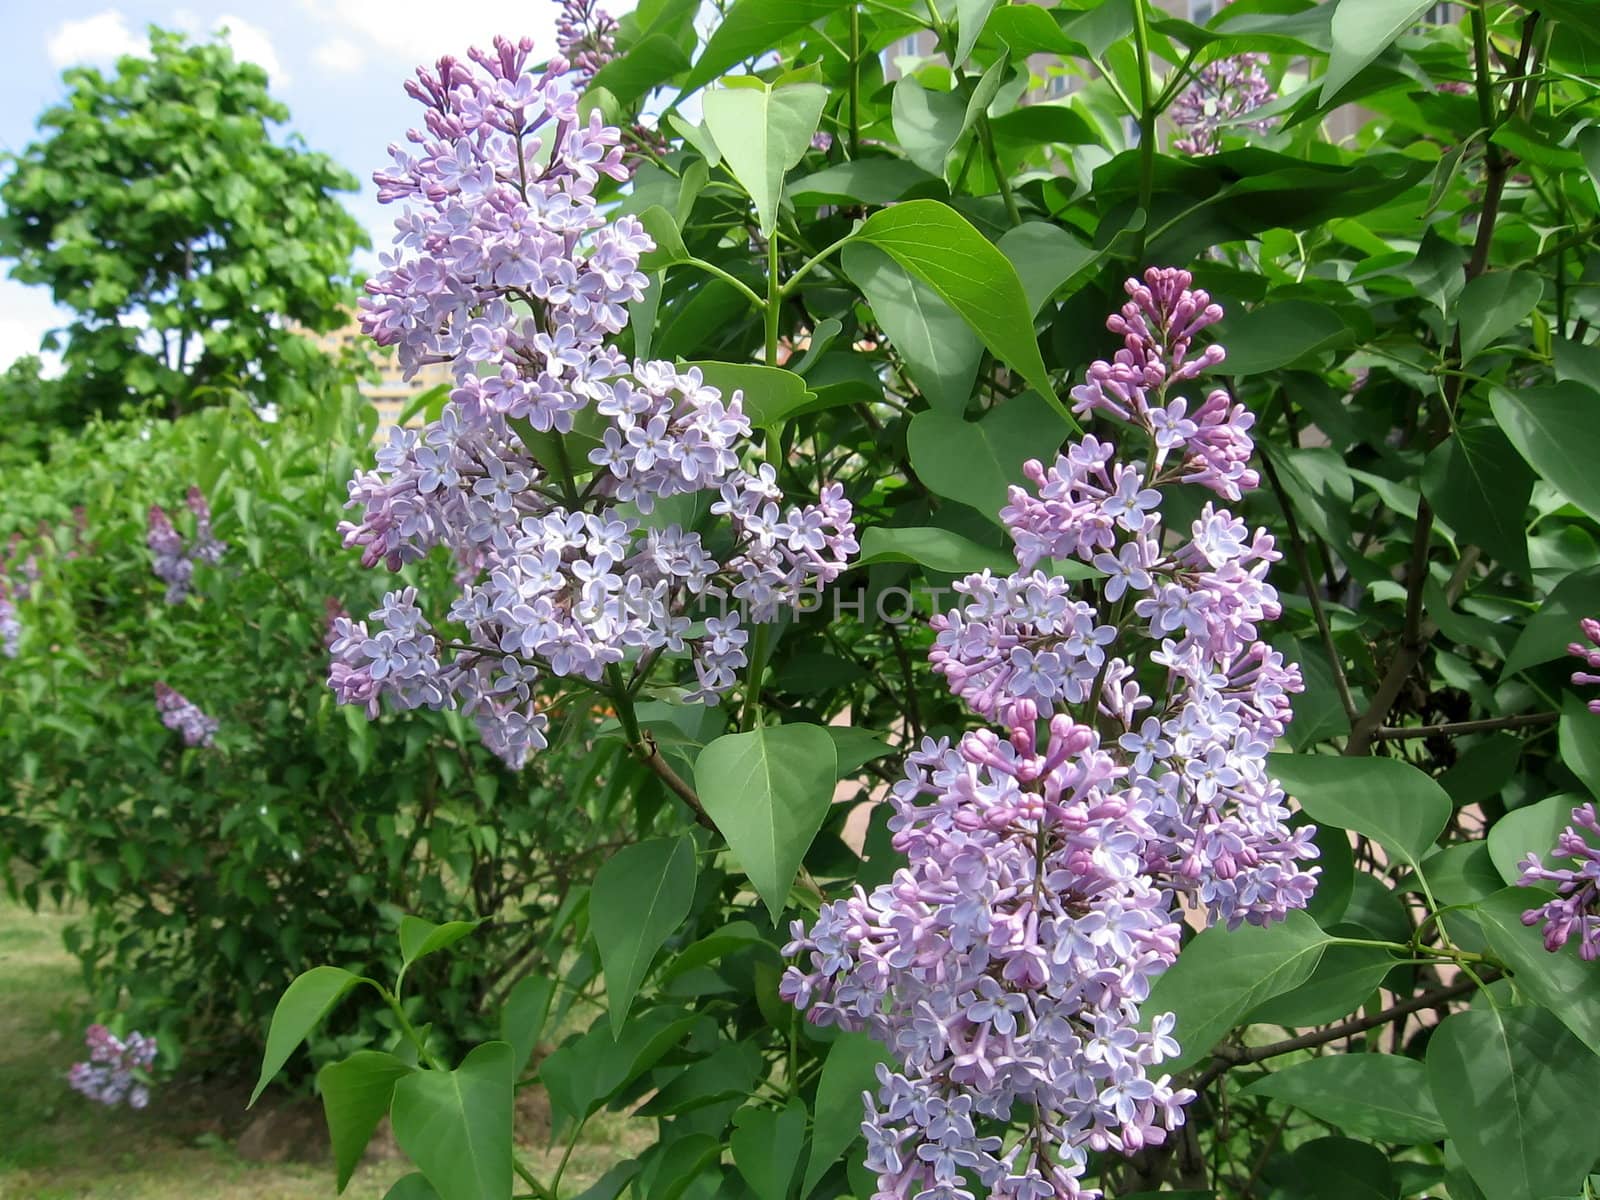 Blossoming lilac brush by tomatto